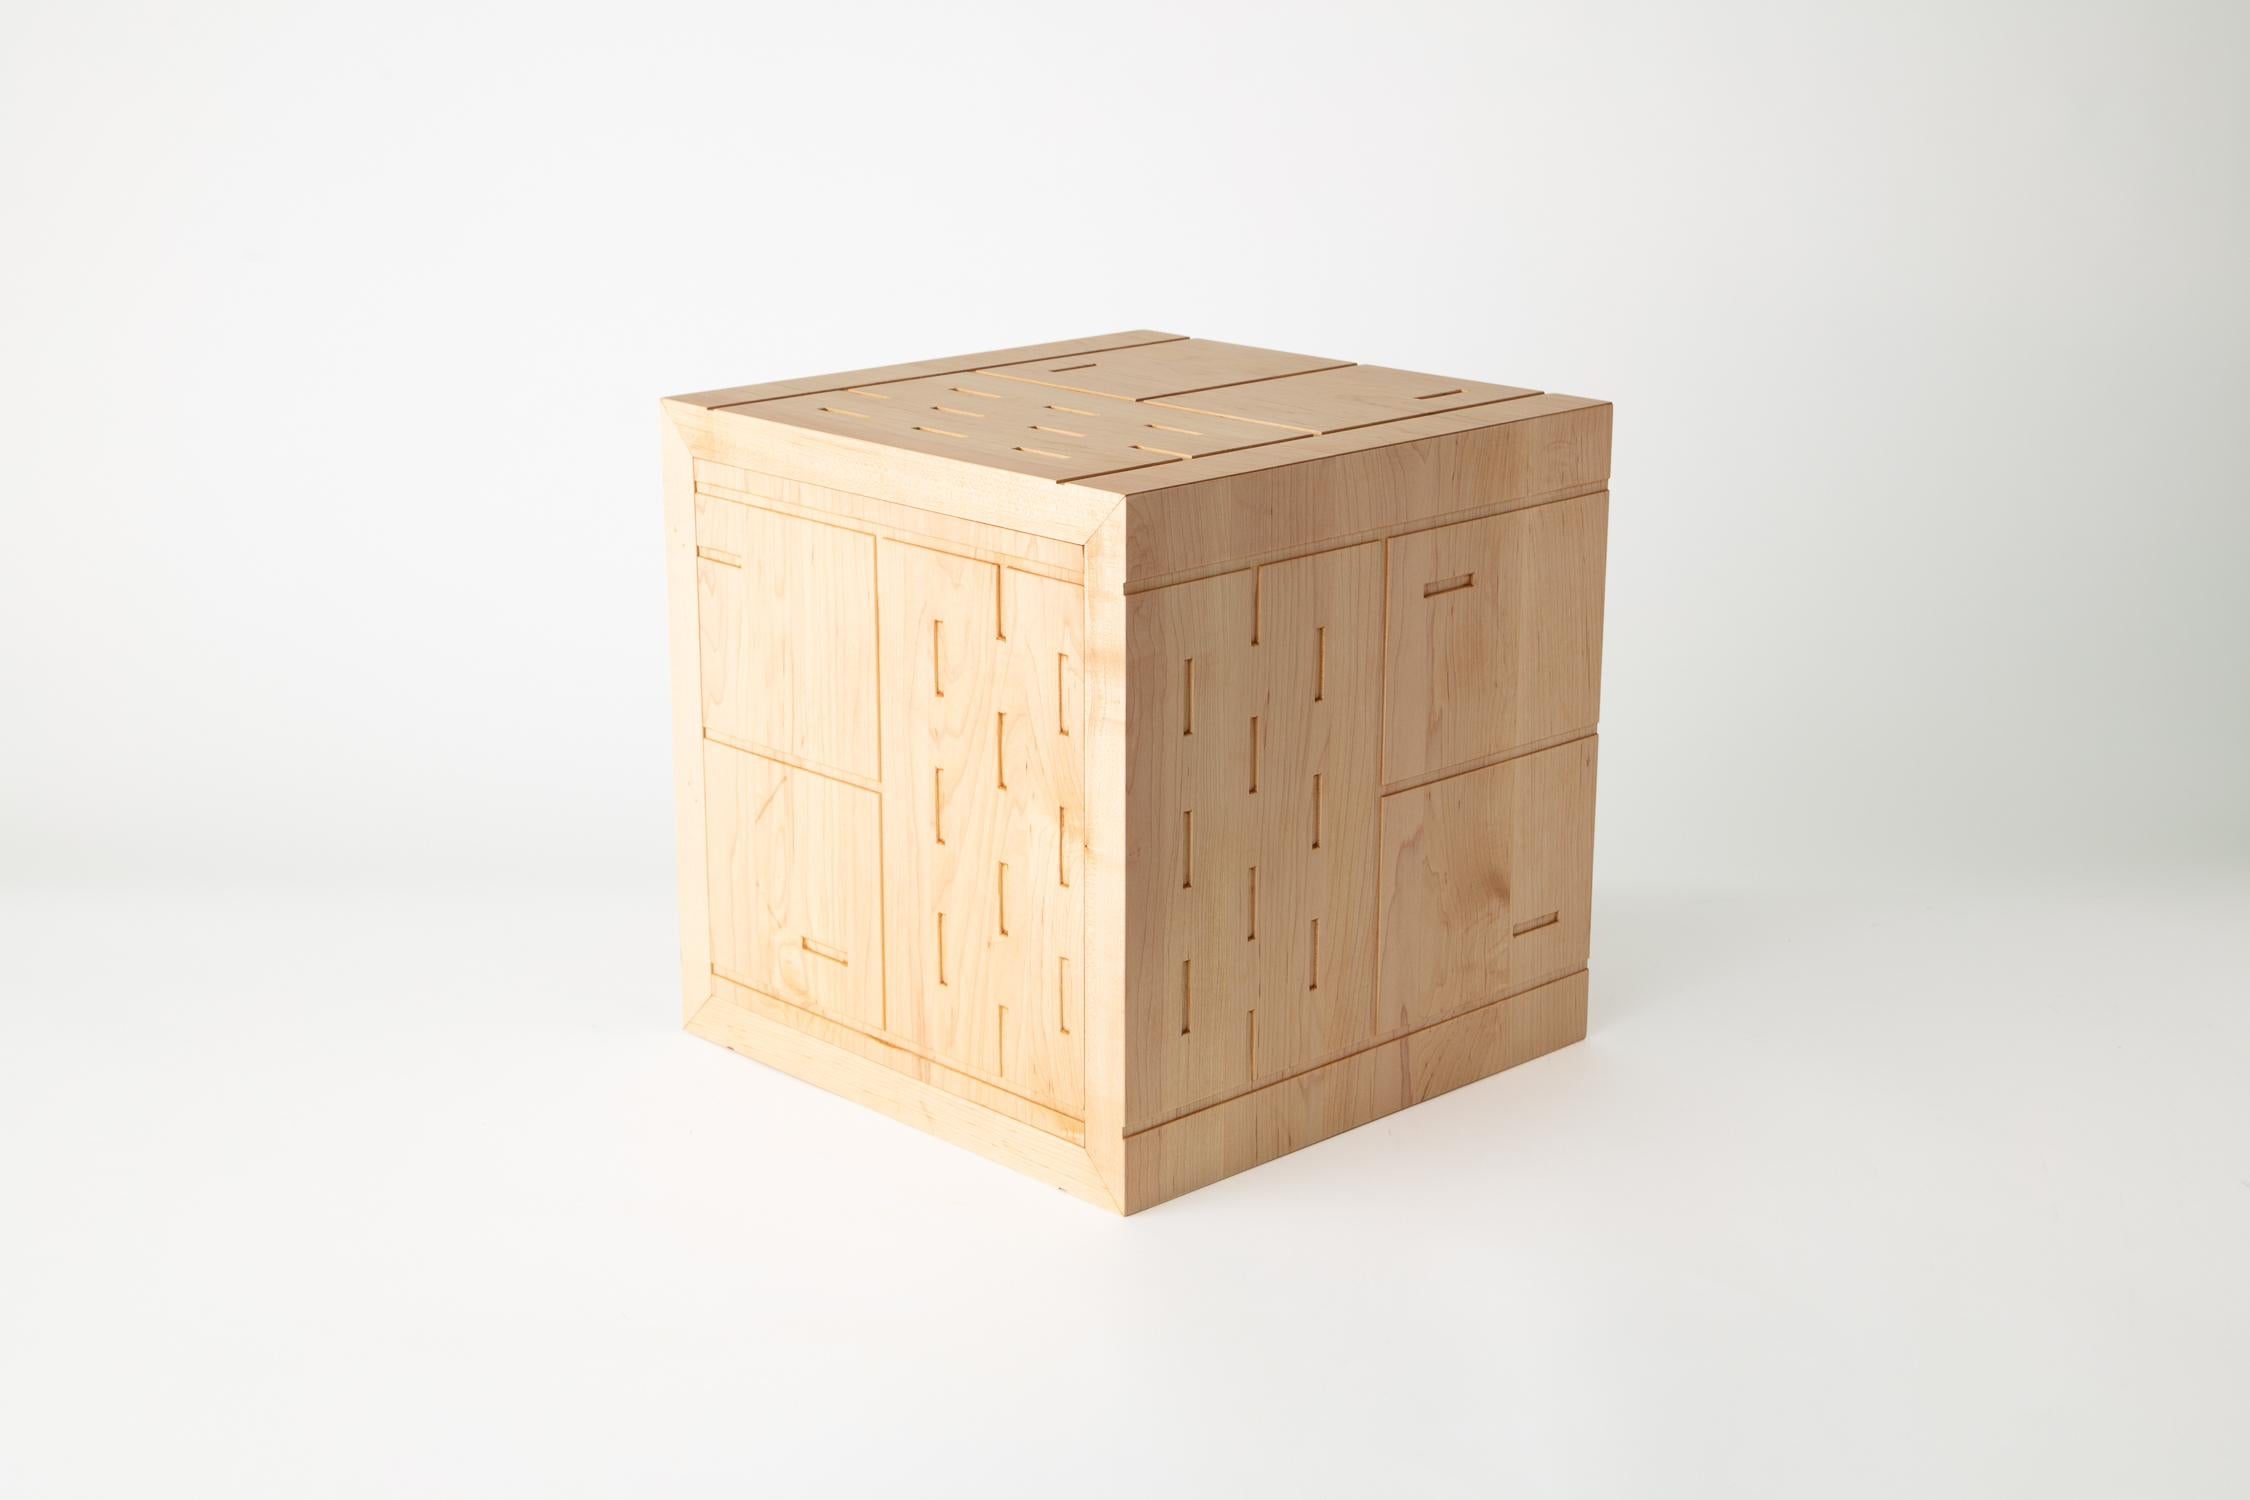 American Craftsman Maple Frogger Cube For Sale